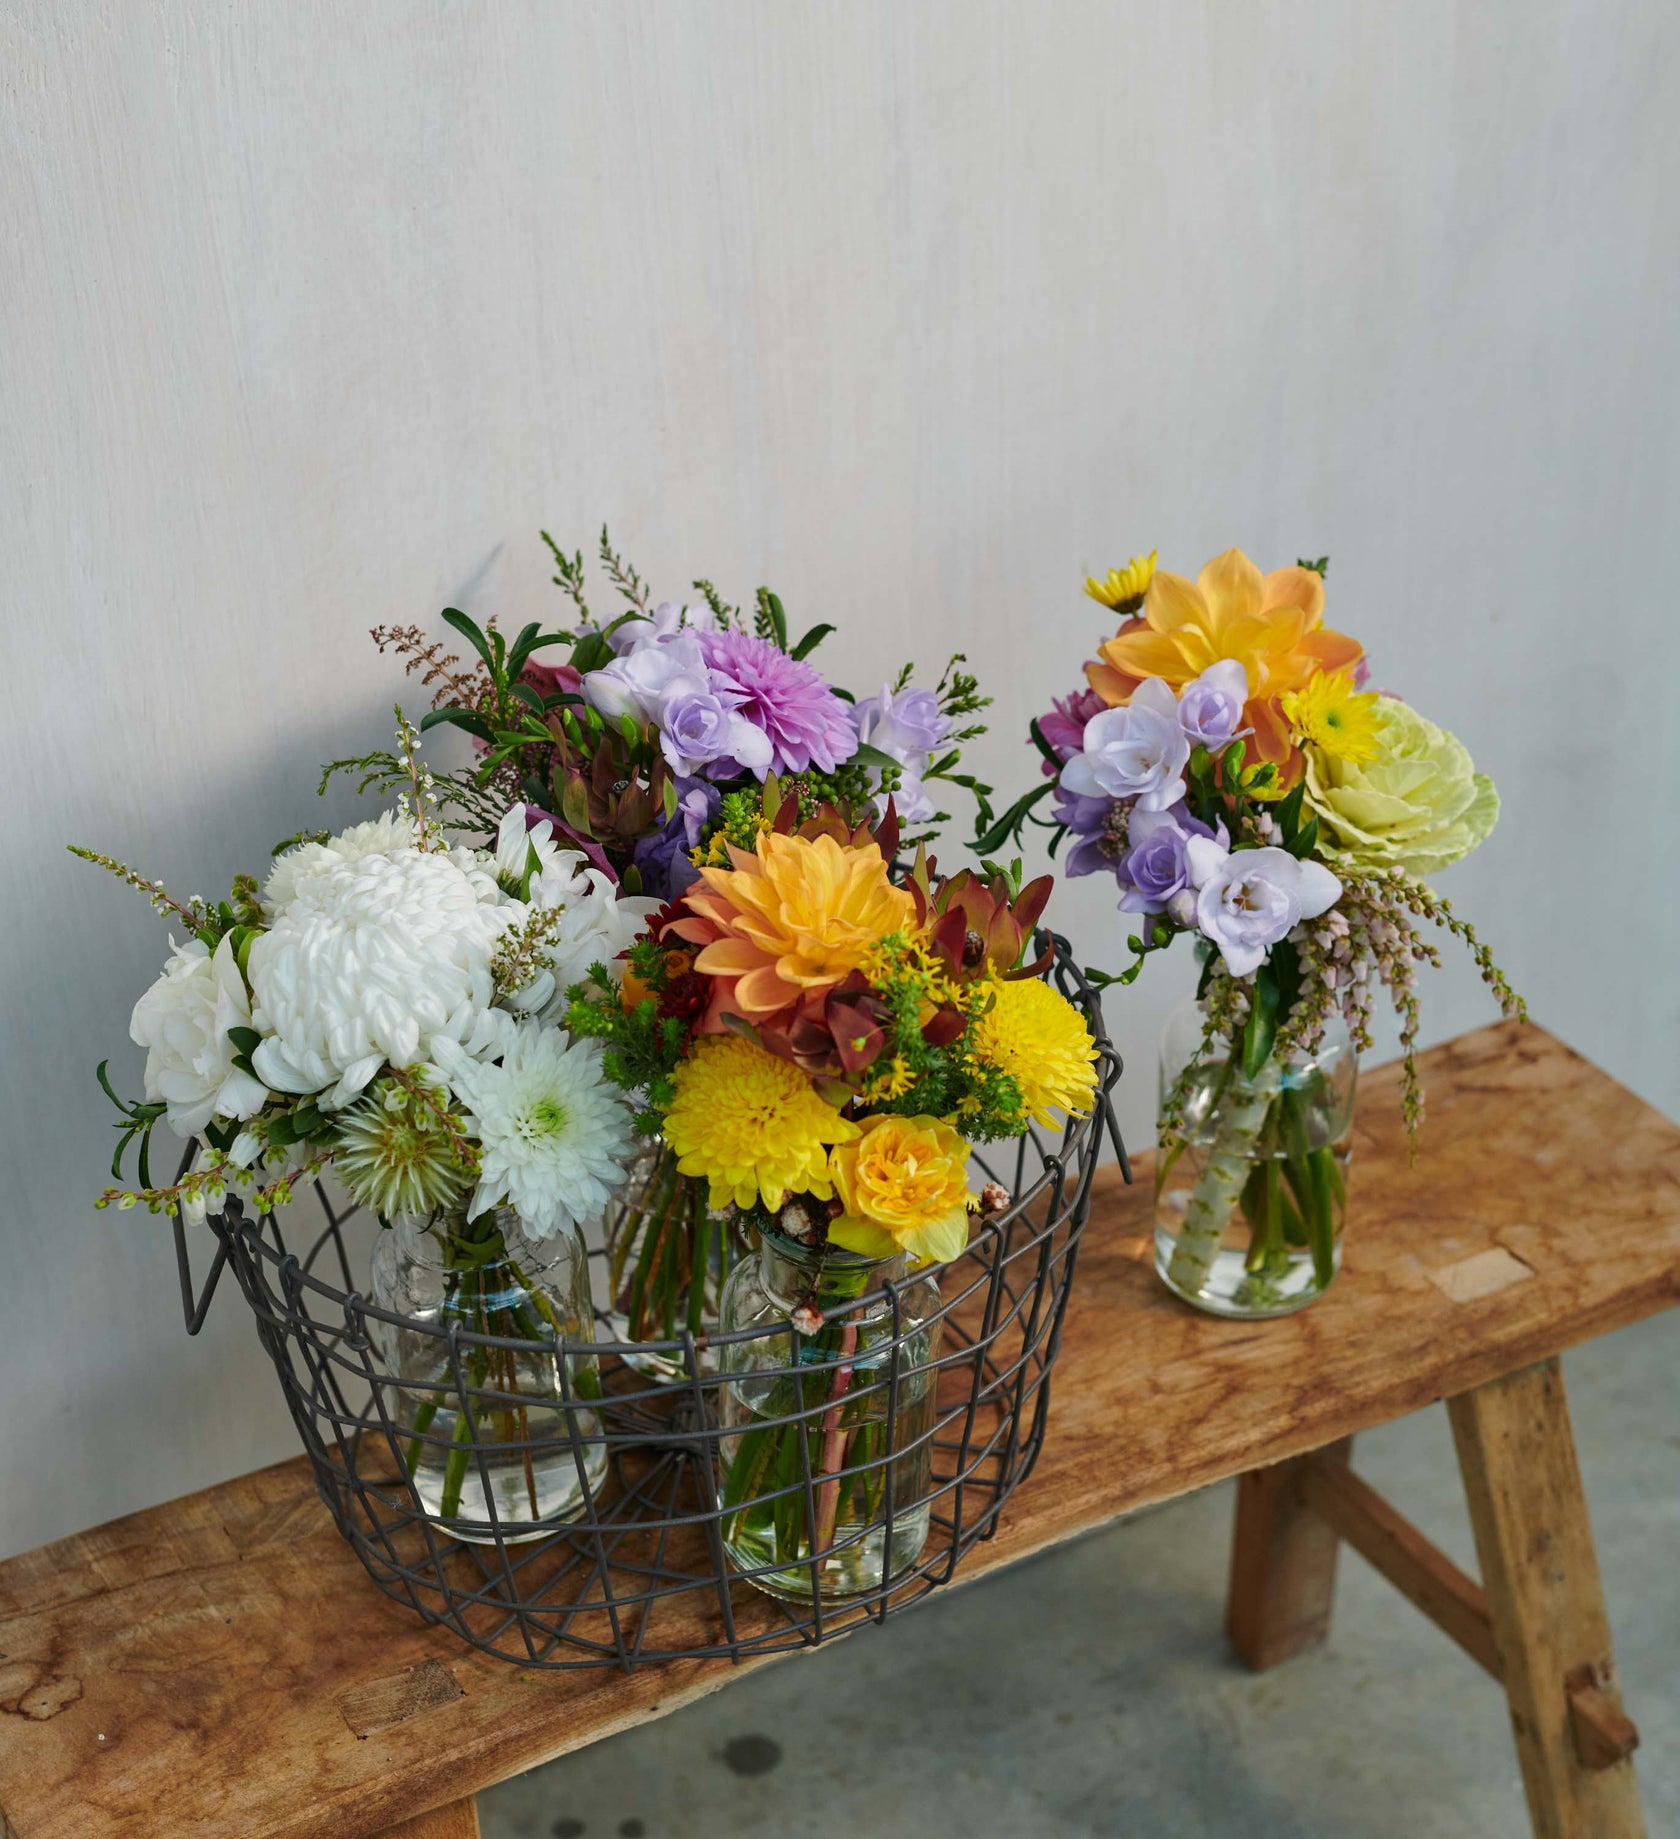 SMALL_JAR_BOUQUETS_GROUPED_IN_BASKET_ON_WOODEN_STOOL